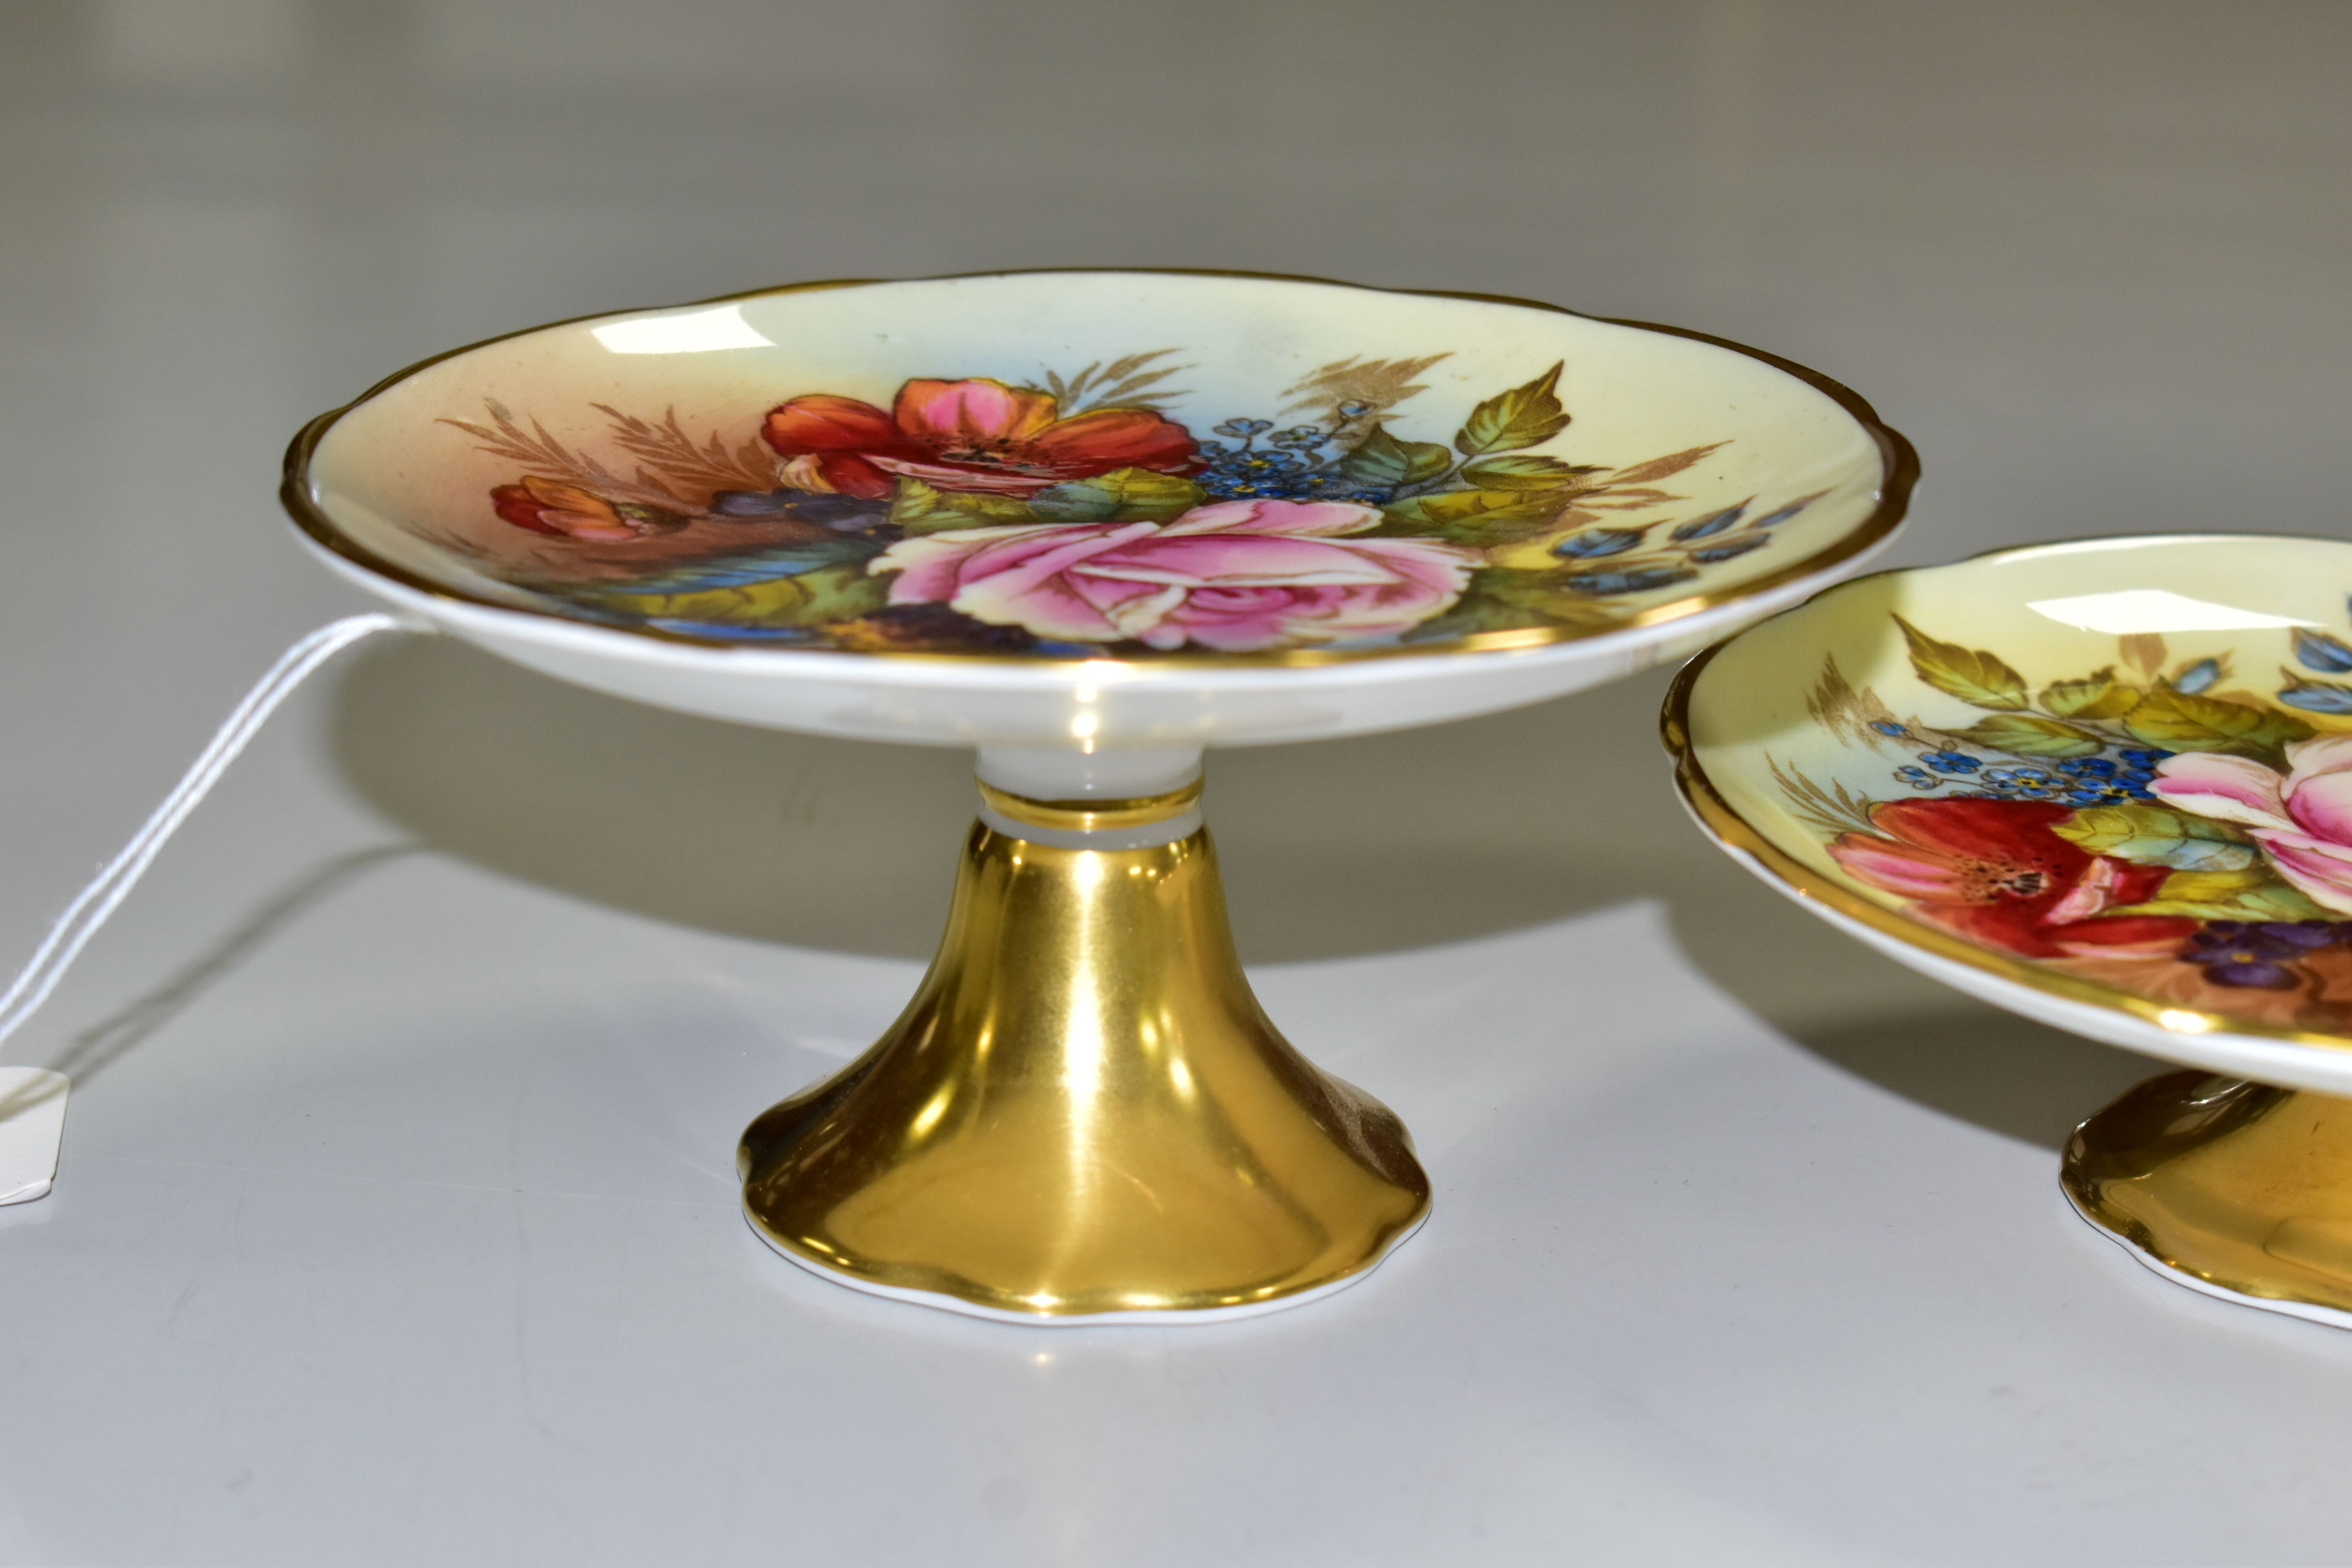 TWO AYNSLEY FLORAL DECORATED PEDESTAL DISHES BY J. A. BAILEY, with wavy rims and gilt bases, both - Image 5 of 6